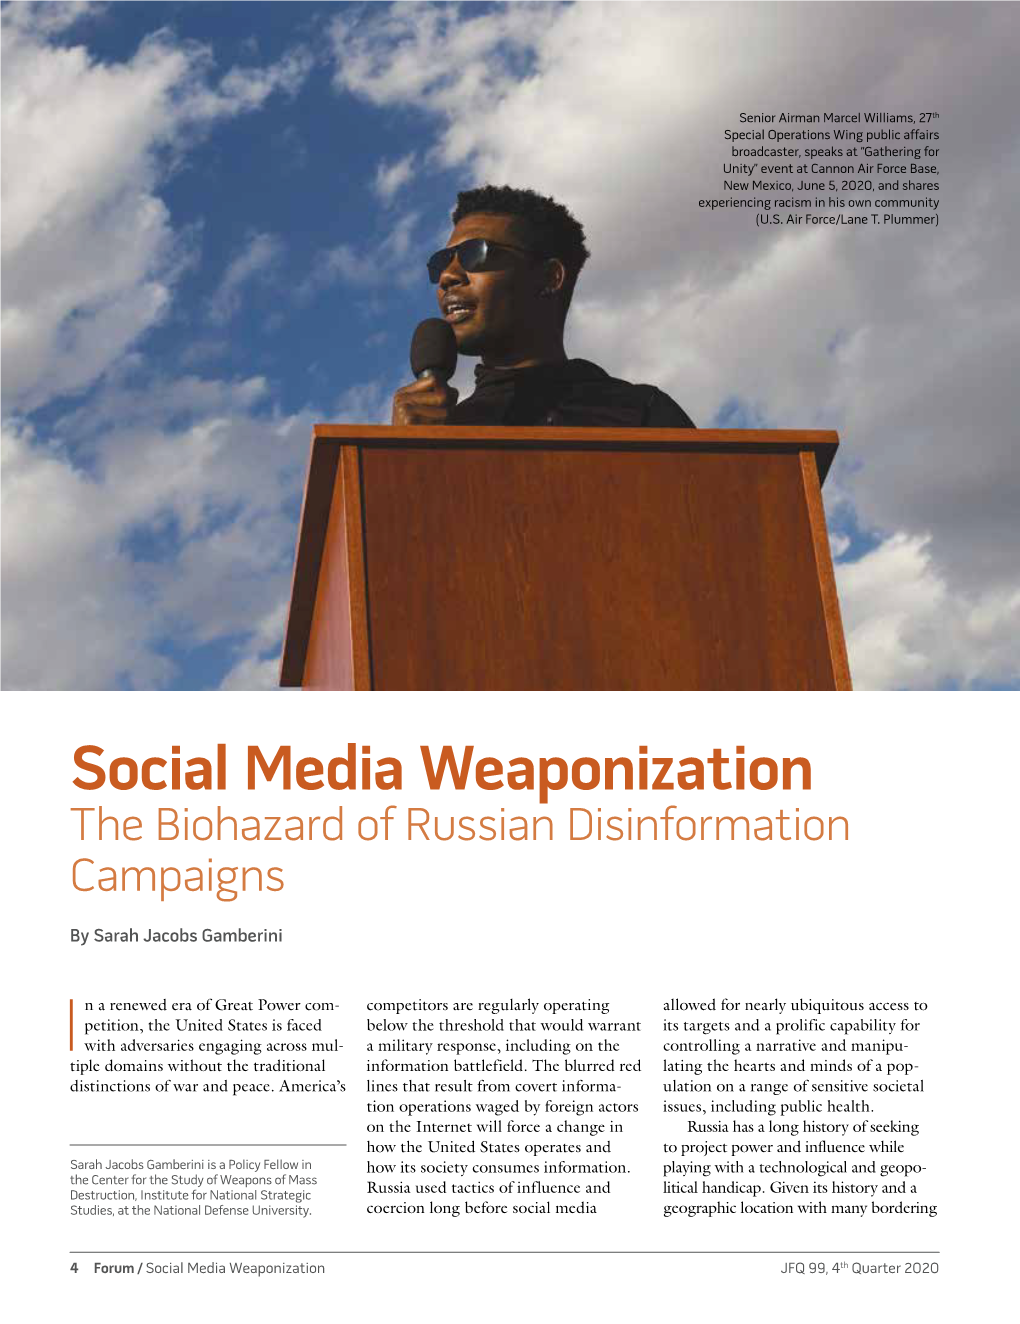 Social Media Weaponization the Biohazard of Russian Disinformation Campaigns